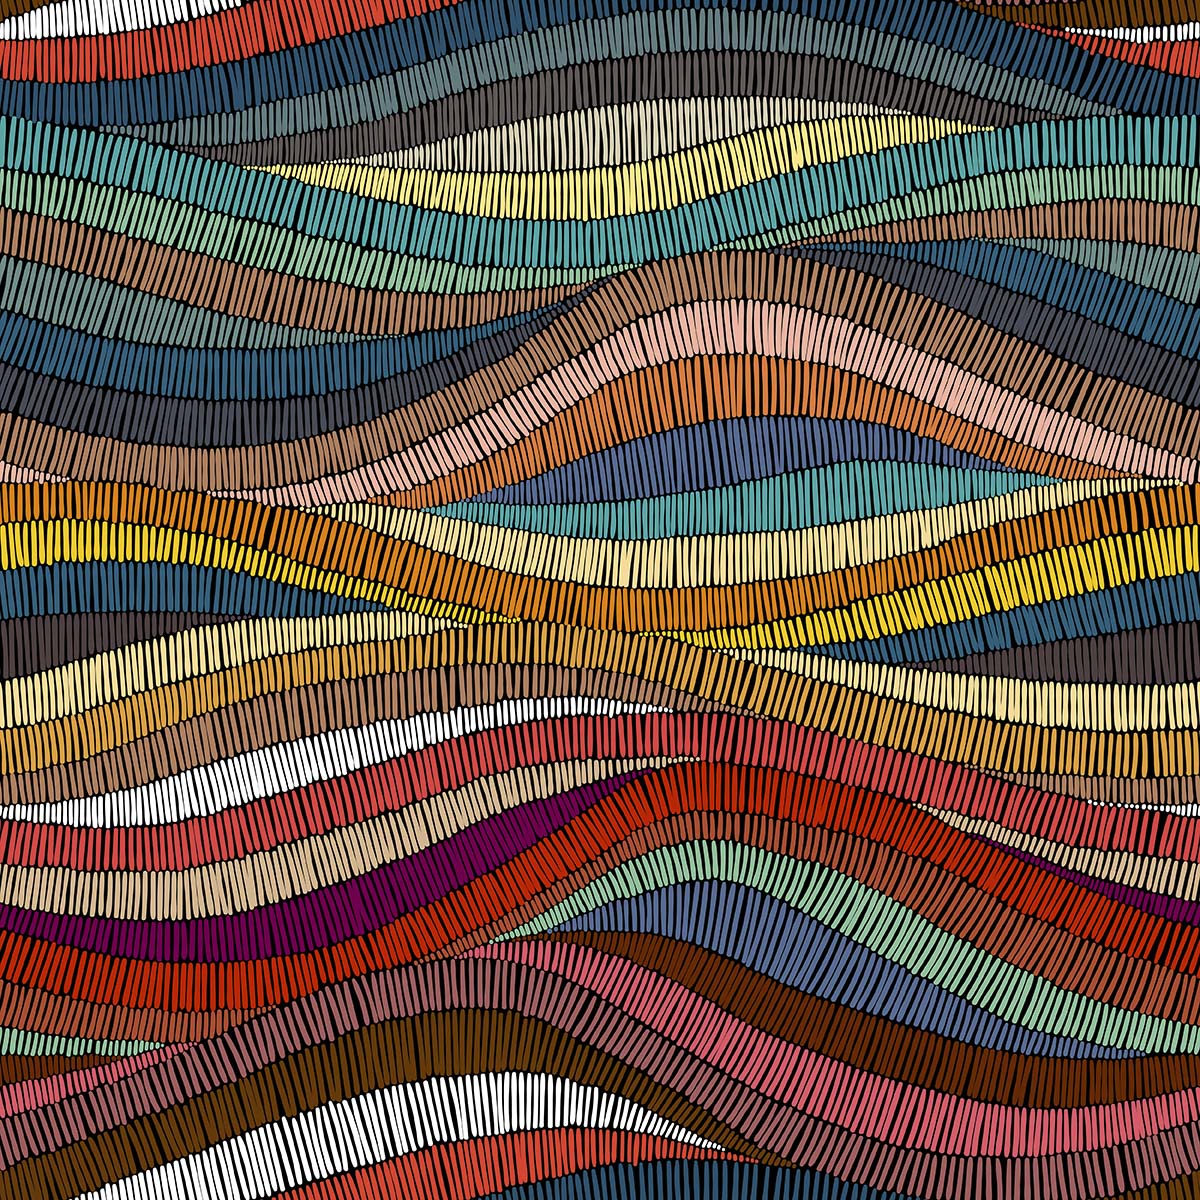 A colorful pattern of wavy lines